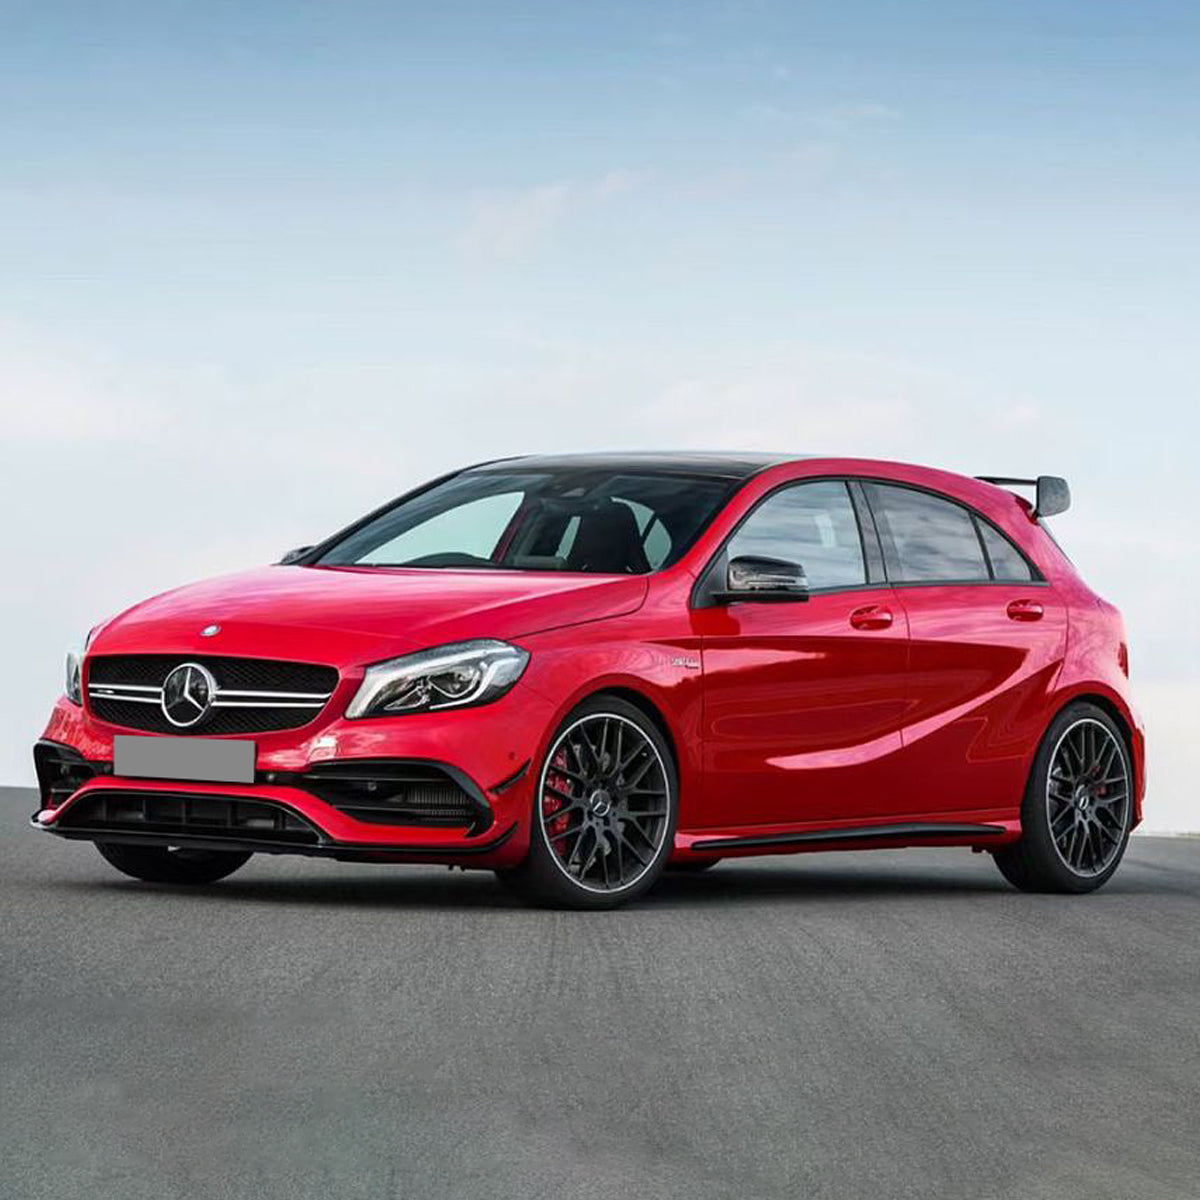 BODY KIT FOR A-CLASS W176 2013-2018 UPGRADE TO A45 AMG